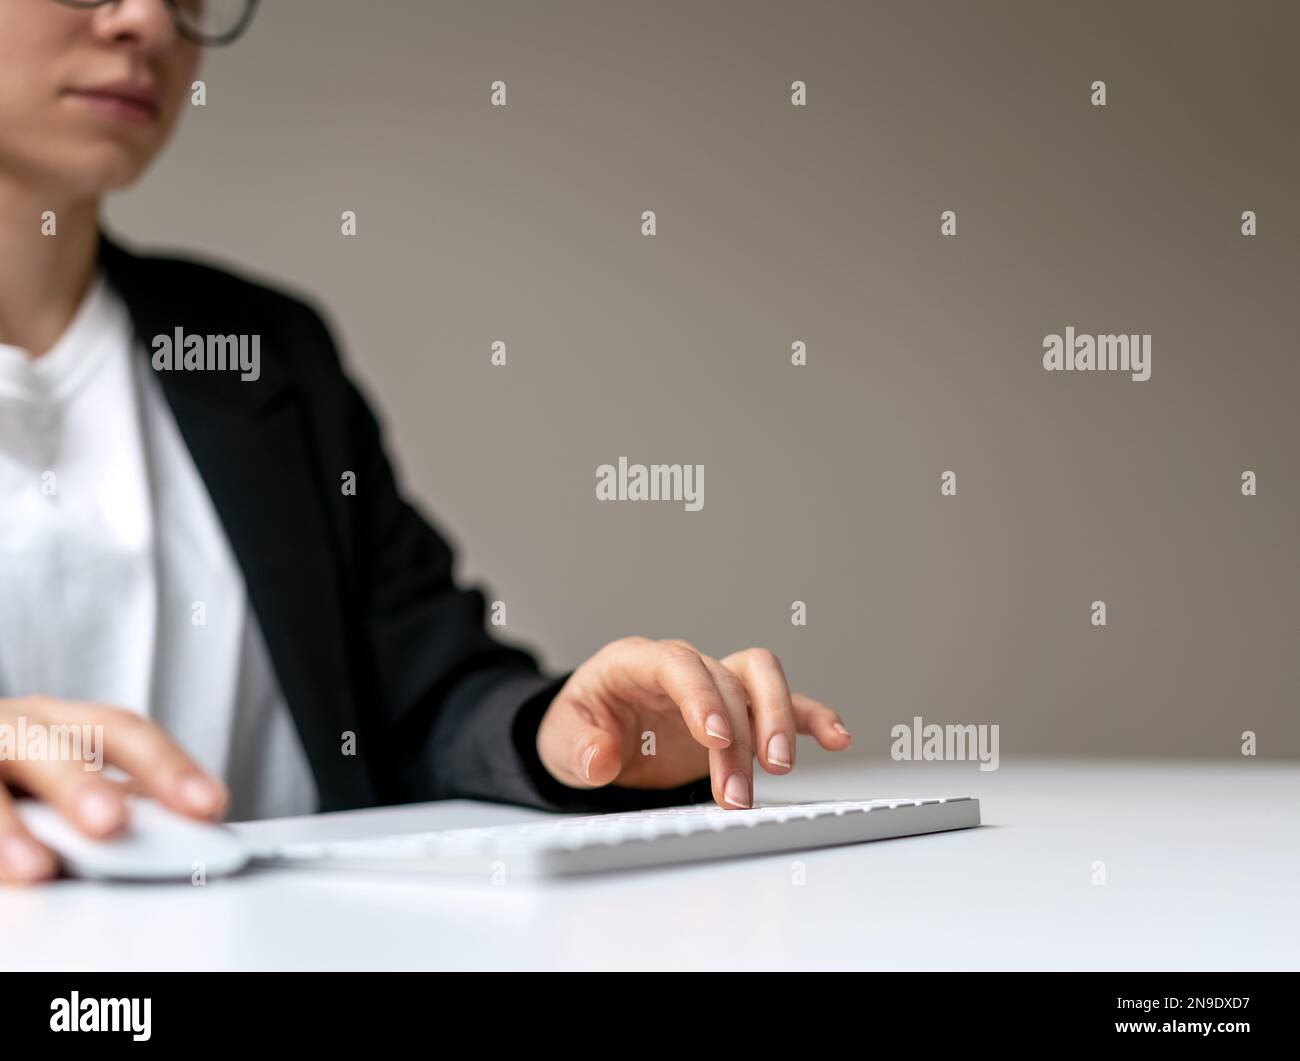 Female business person press keyboard button and using computer mouse. Stock Photo